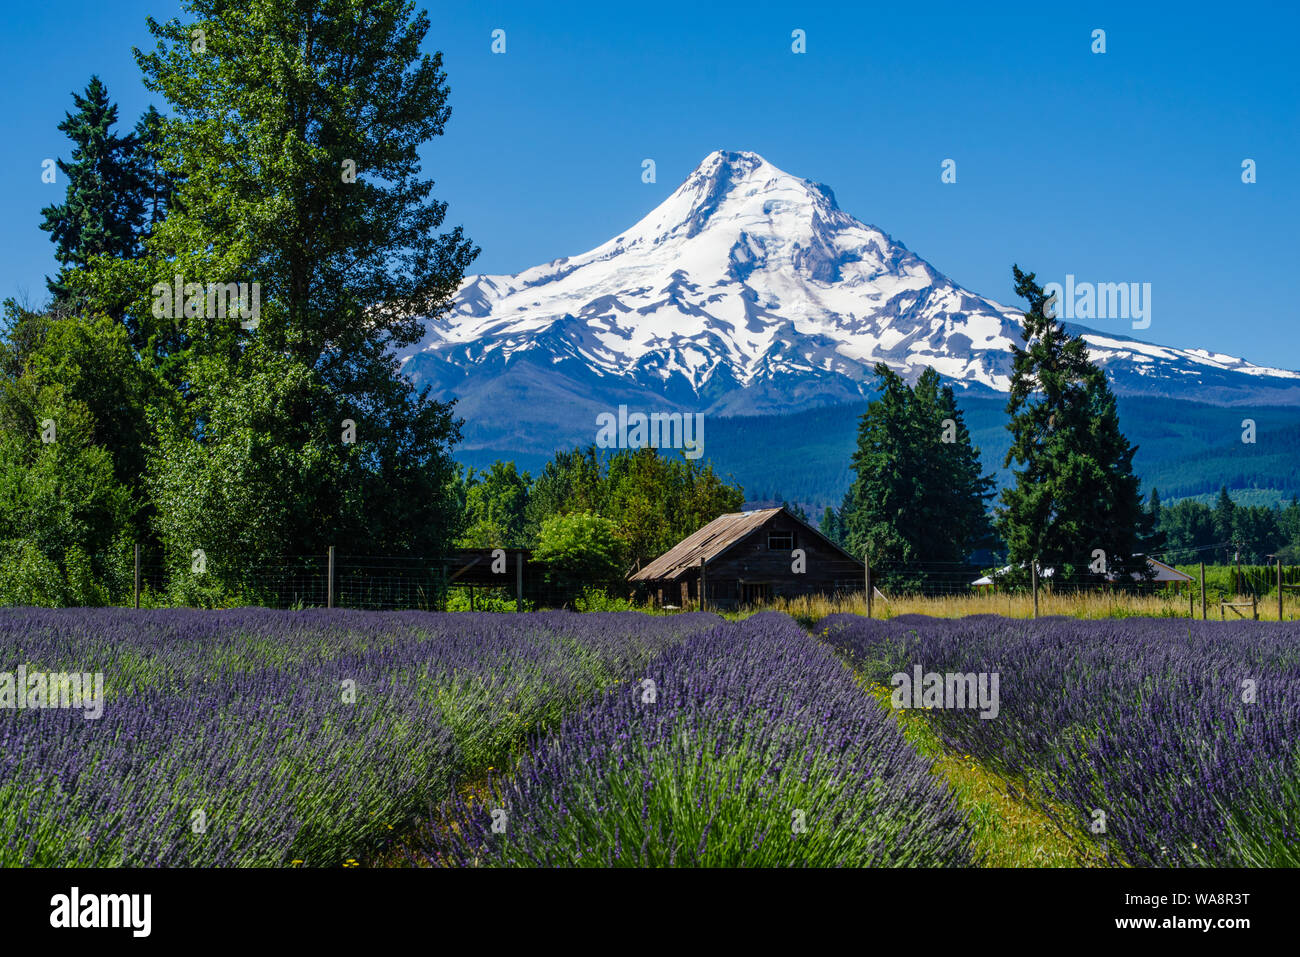 Snow covered Mt Hood forms a background for a Lavender farm in full bloom.  Mt Hood Oregon Stock Photo